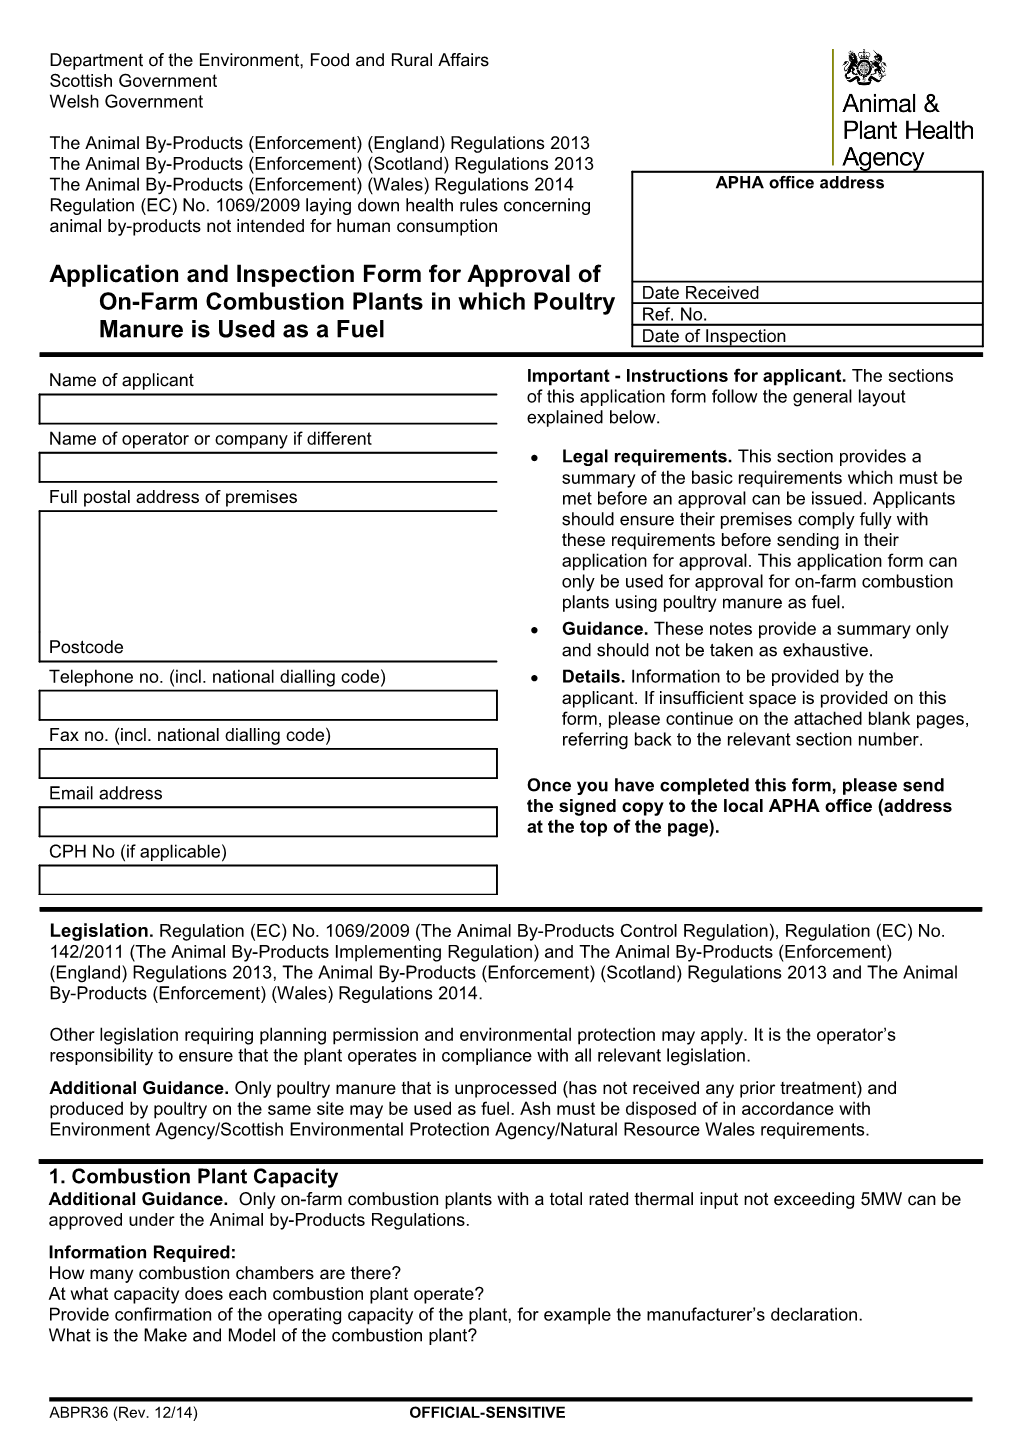 Application and Inspection Form for Approval of On-Farm Combustion Plants in Which Poultry